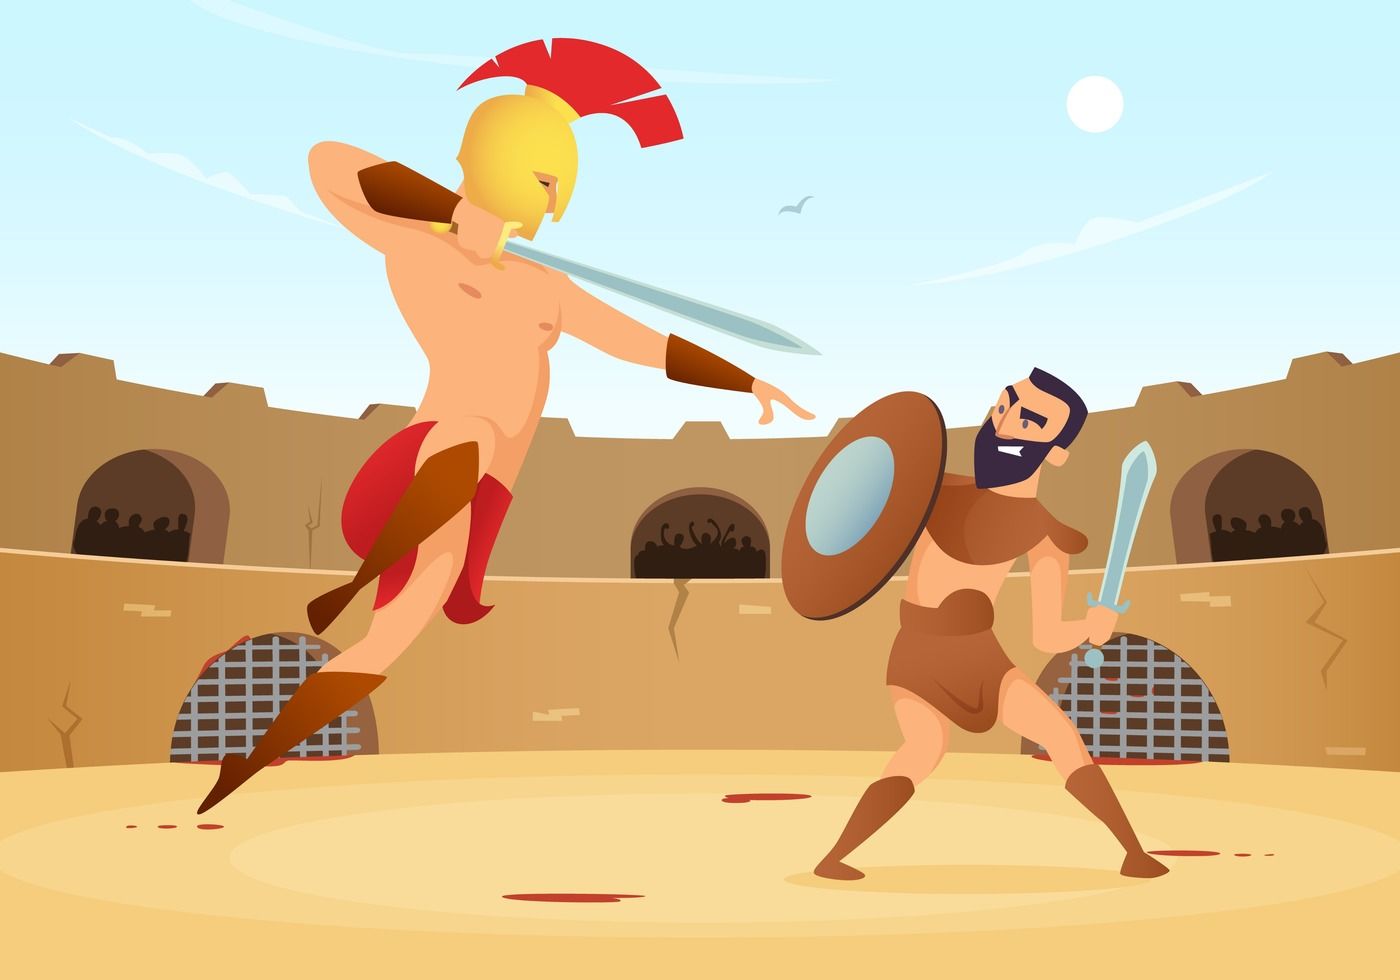 spartan clipart fighting